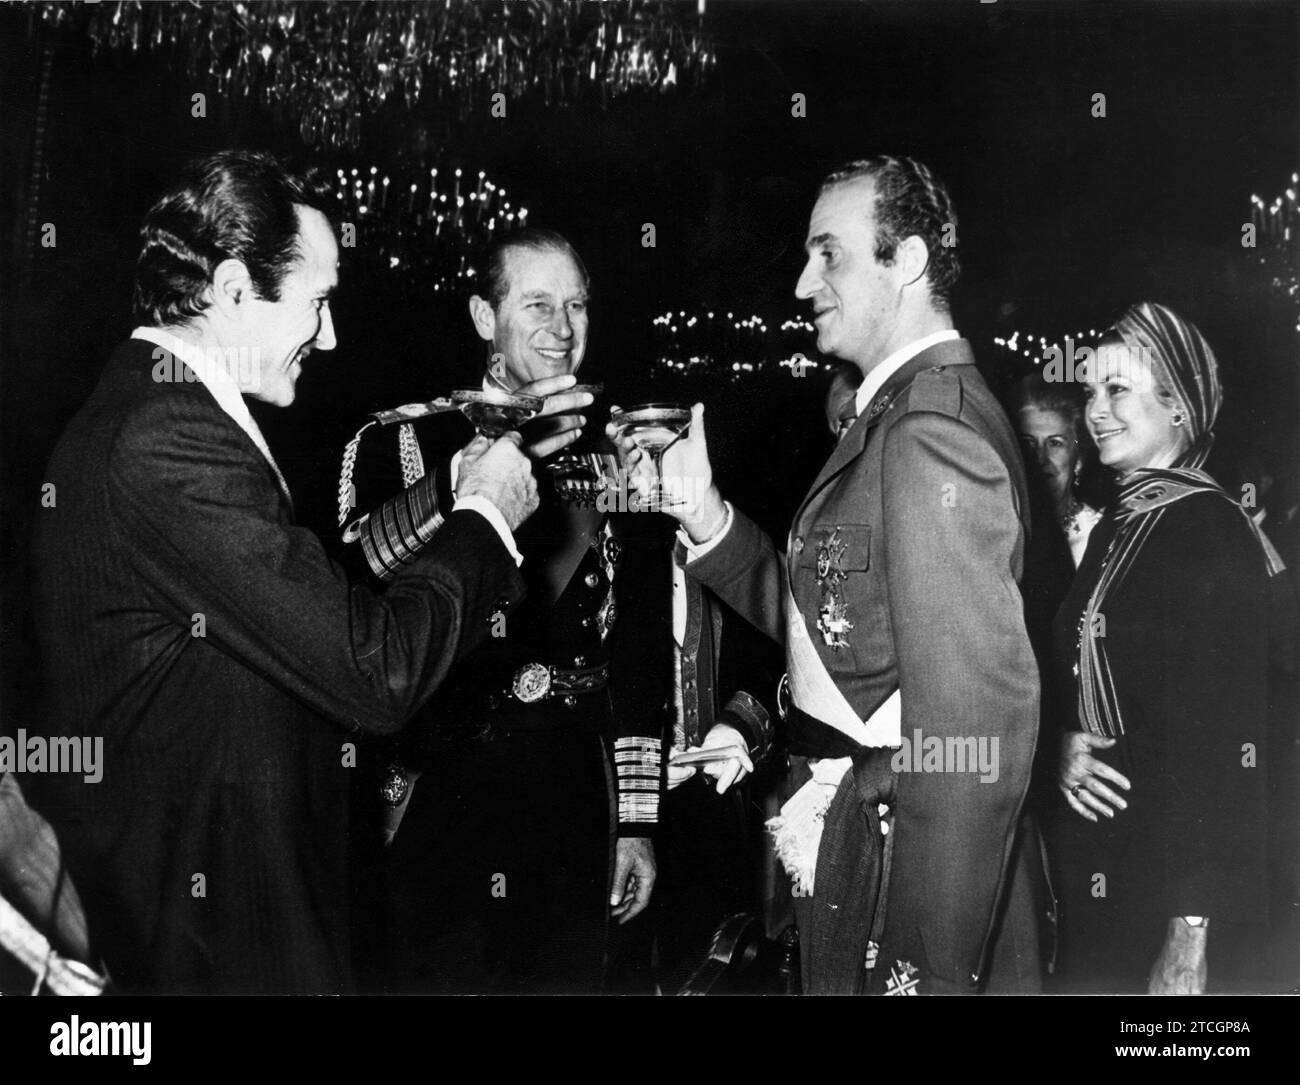 11/27/1975. Acts of exaltation to the Crown. HM Juan Carlos and the Duke of Edinburgh, husband of Queen Elizabeth II of England, appear toasting during the reception offered at the Royal Palace on the occasion of the official proclamation of Juan Carlos I as King of Spain. Credit: Album / Archivo ABC Stock Photo